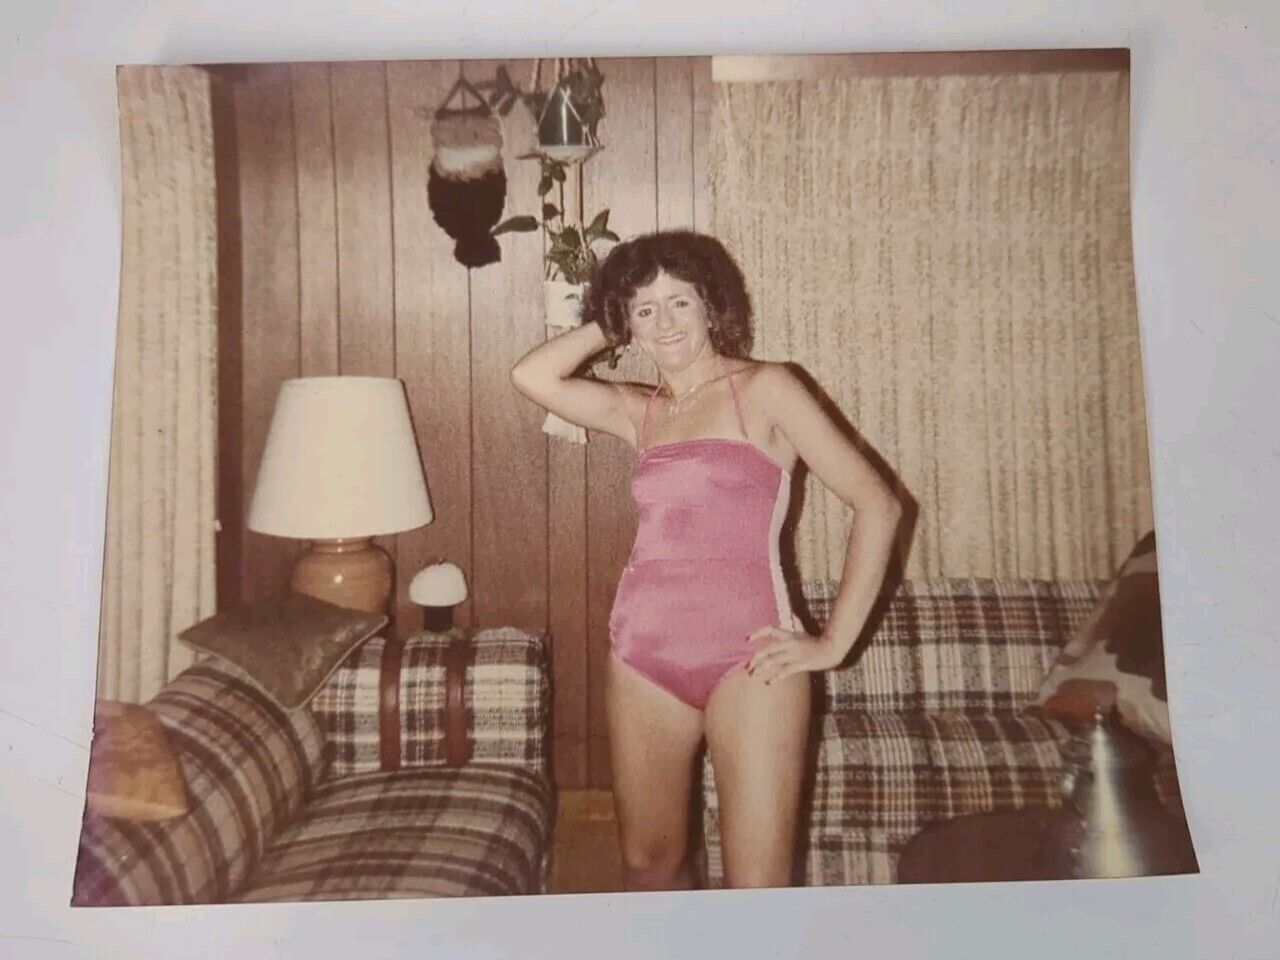 VTG 1980s Found Photograph Original Photo Sexy Lady in Shiny Pink Swimsuit Posed